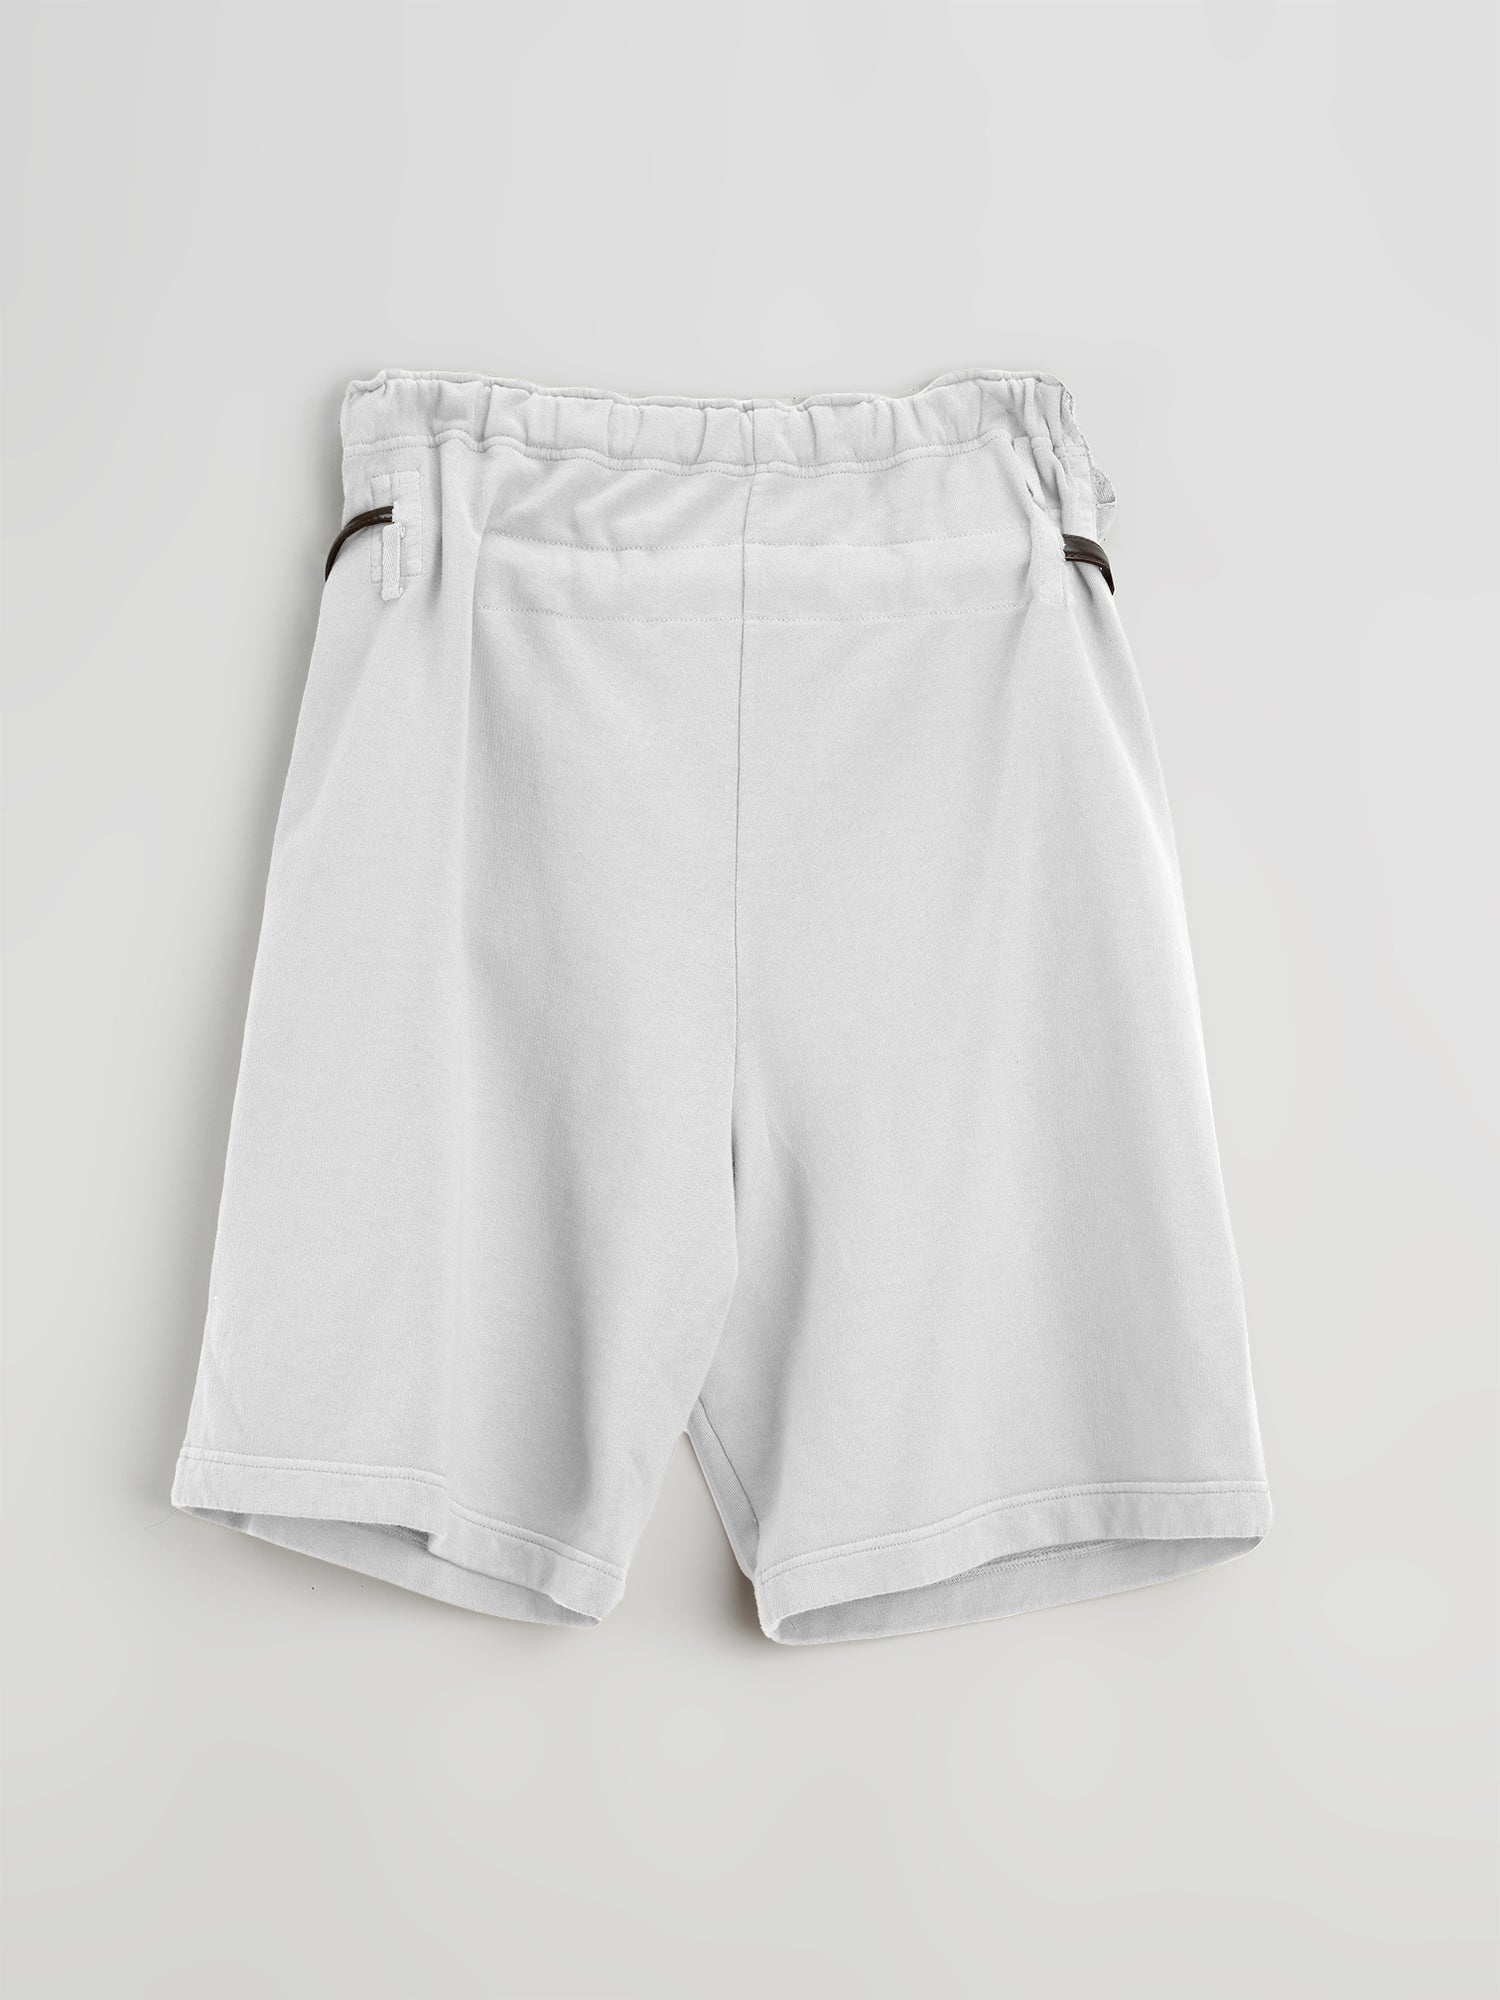 Provincia Athletic Shorts Tooth White - 2